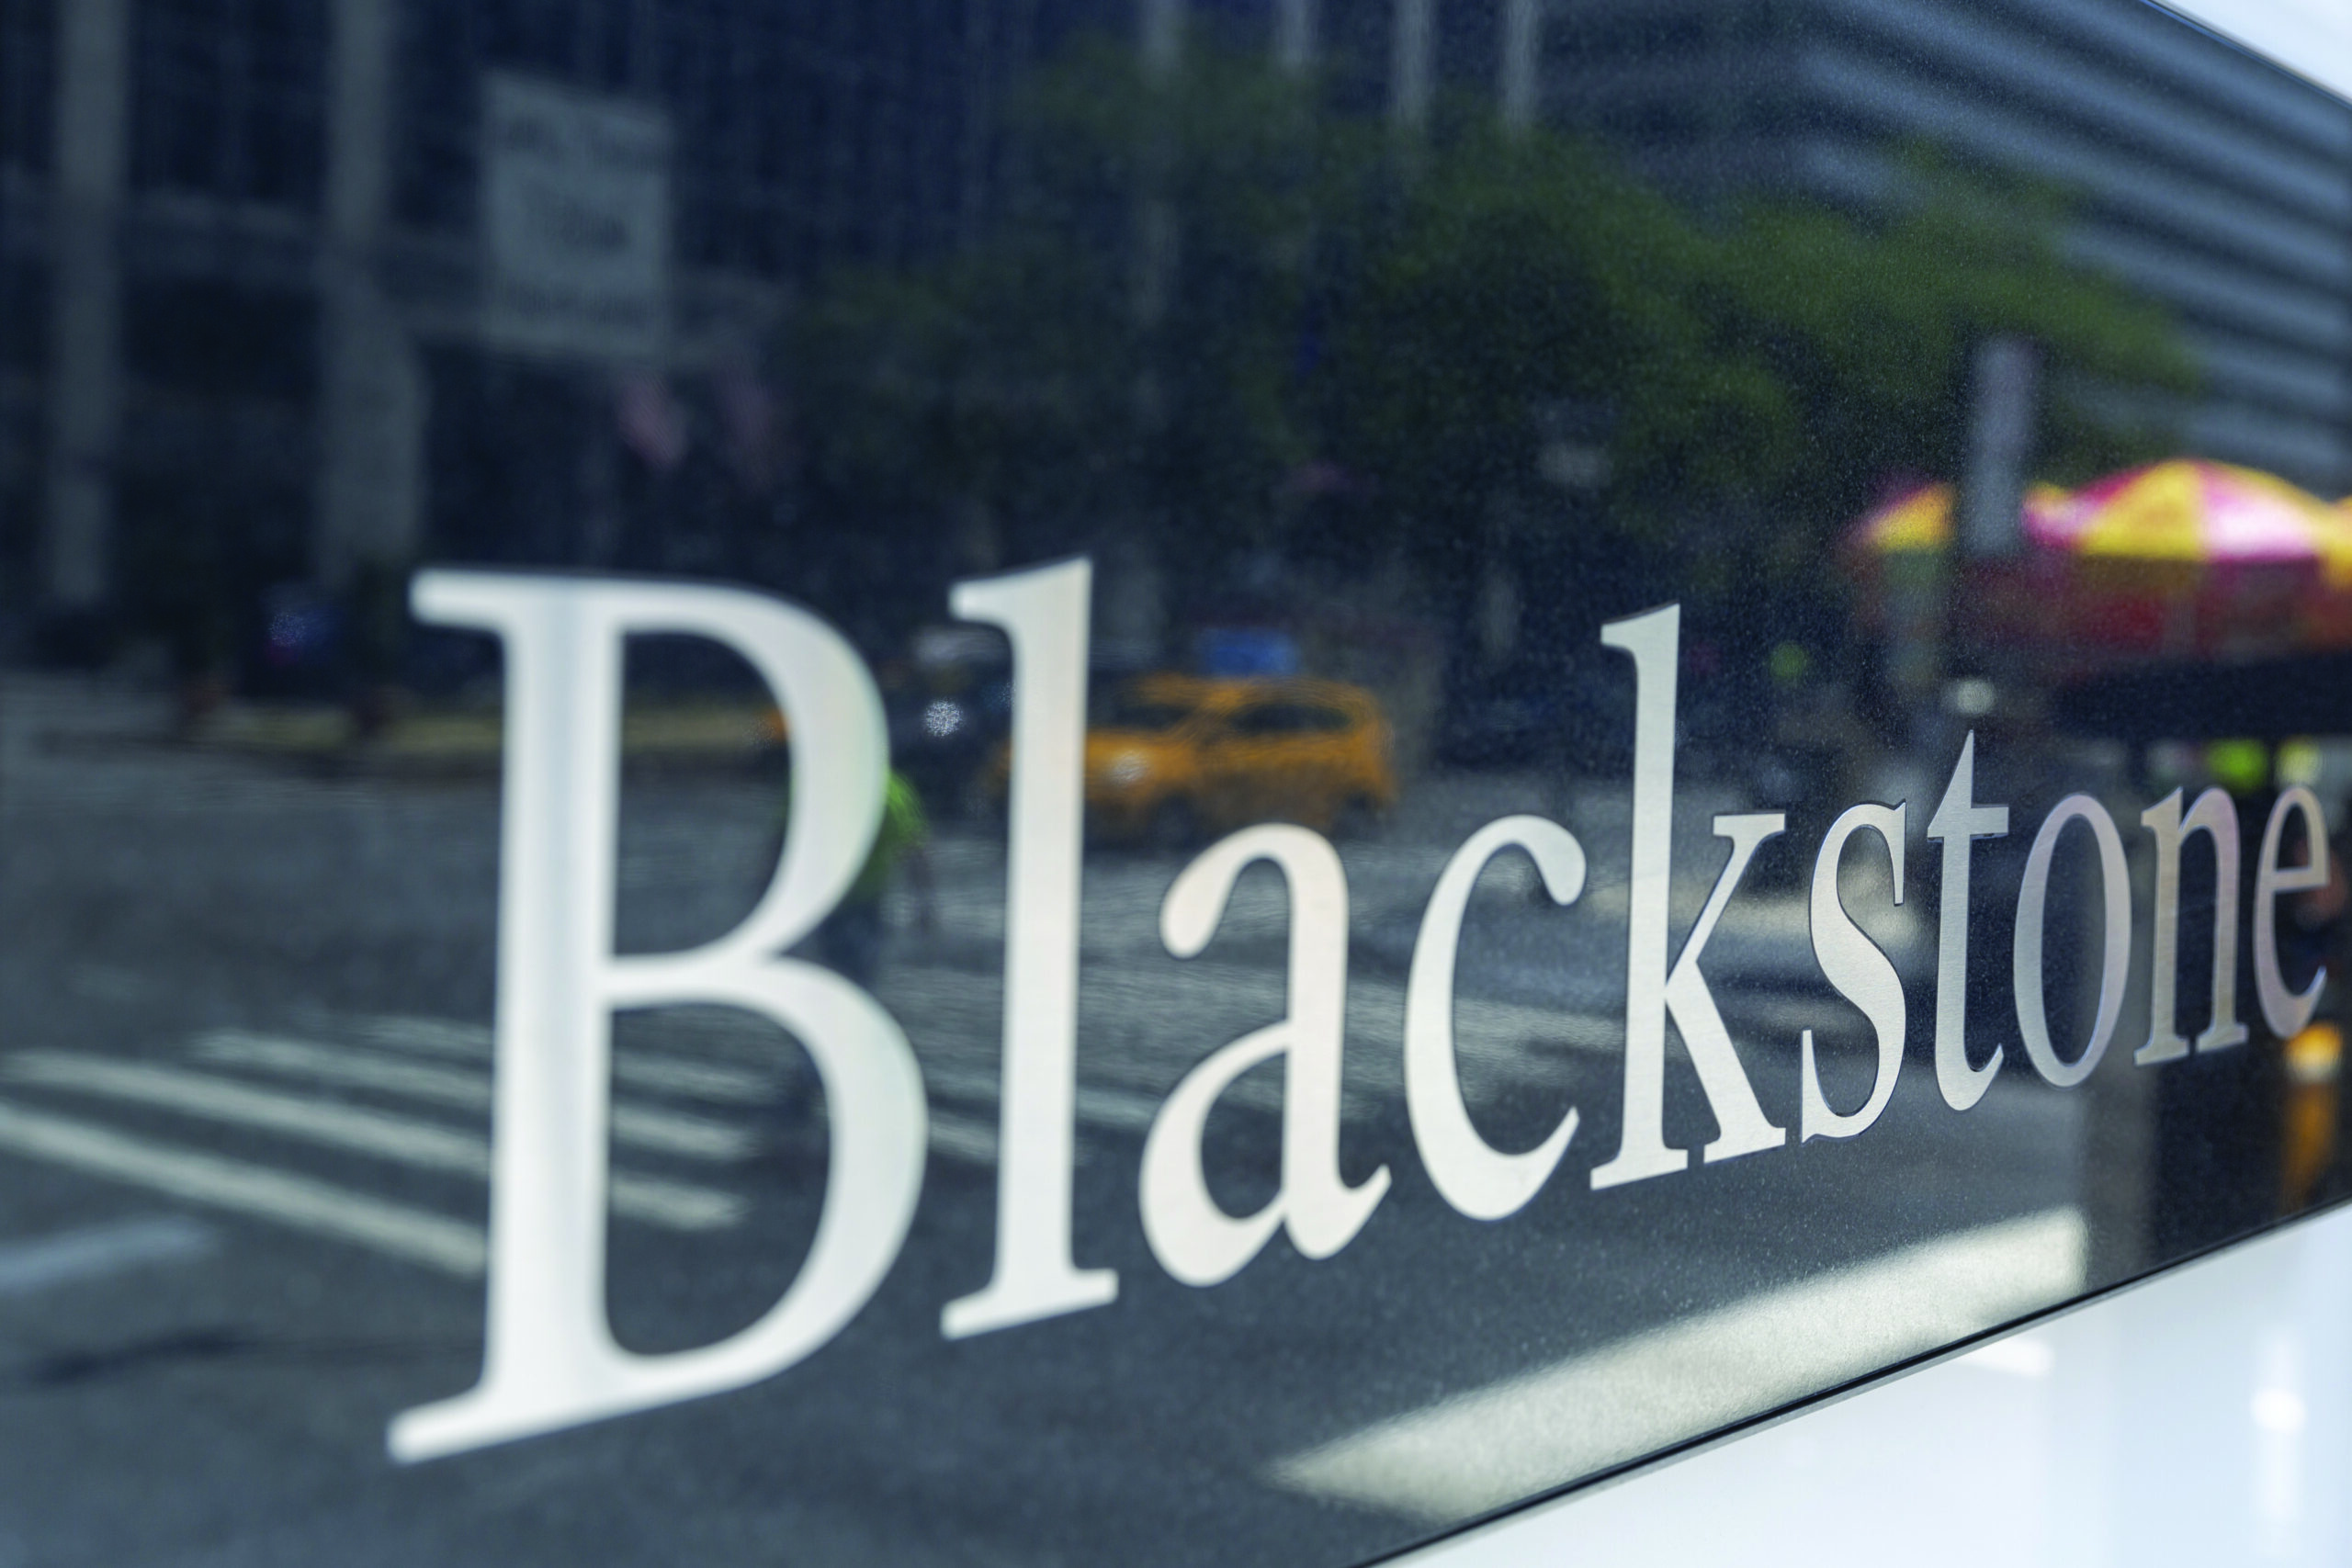 Why The Blackstone Group Inc. Stock Will Fly to 70.00 Over the Next 12